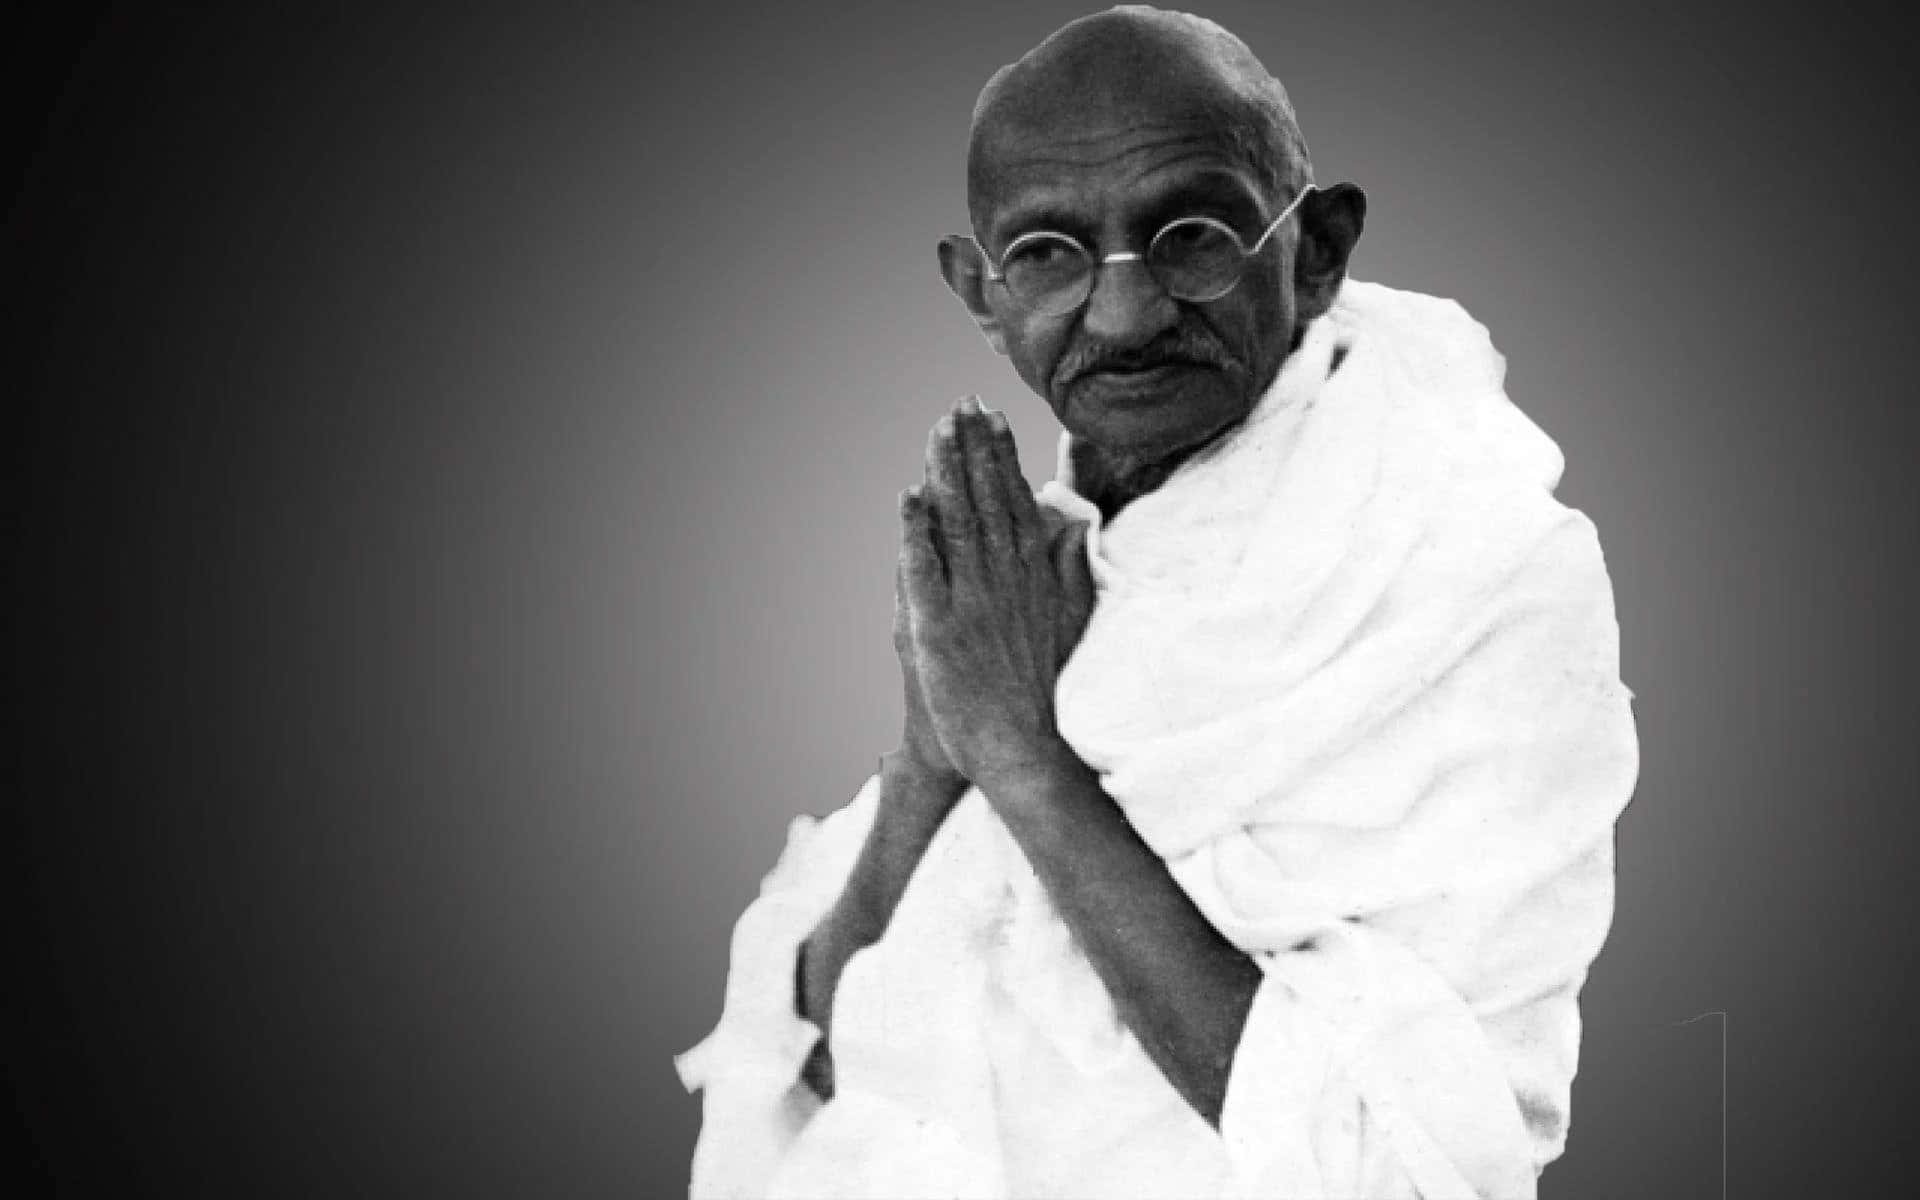 “Be the Change You Wish to See in the World” - Mahatma Gandhi